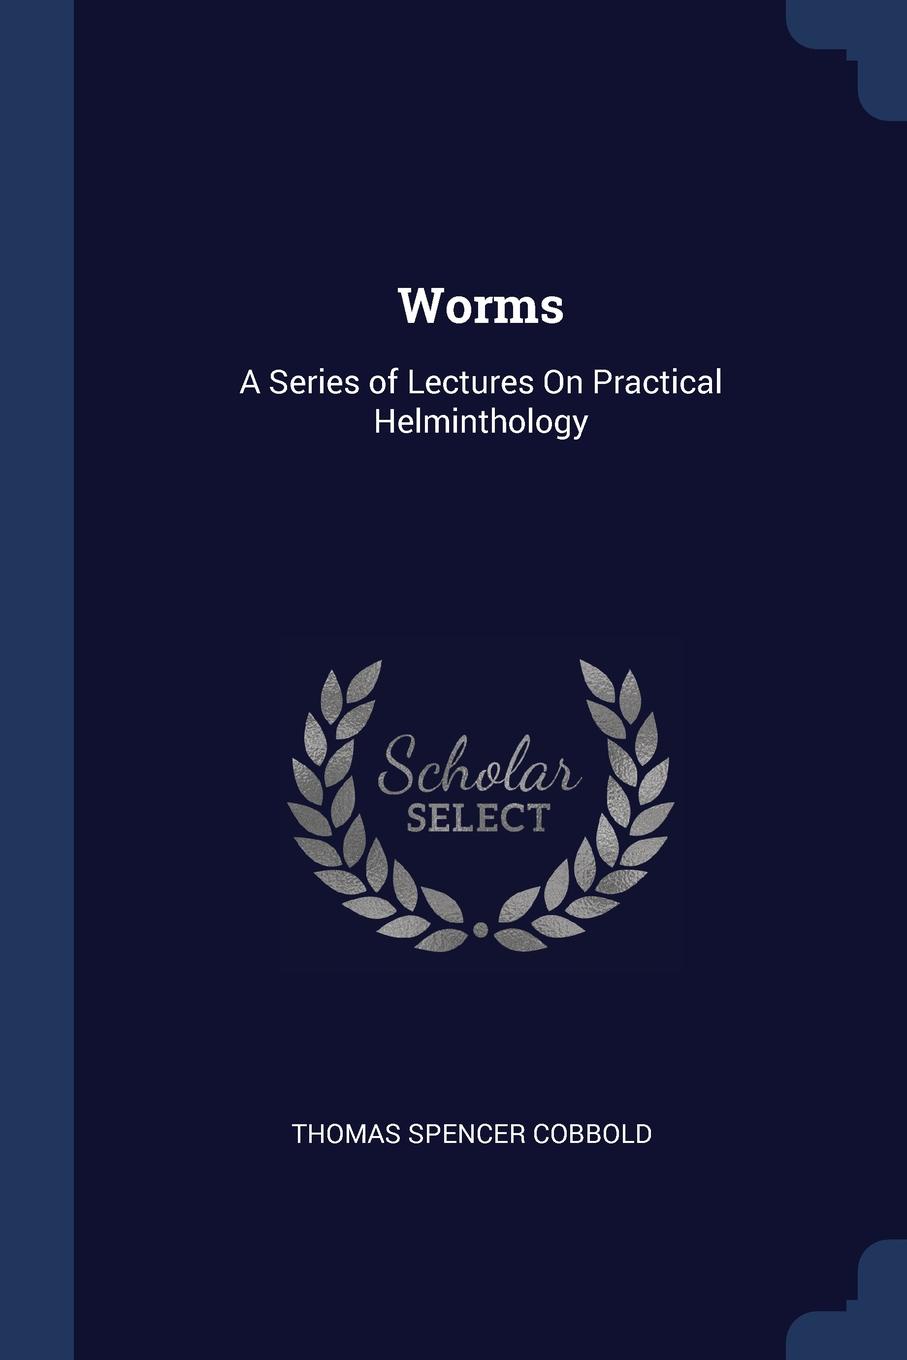 Worms. A Series of Lectures On Practical Helminthology